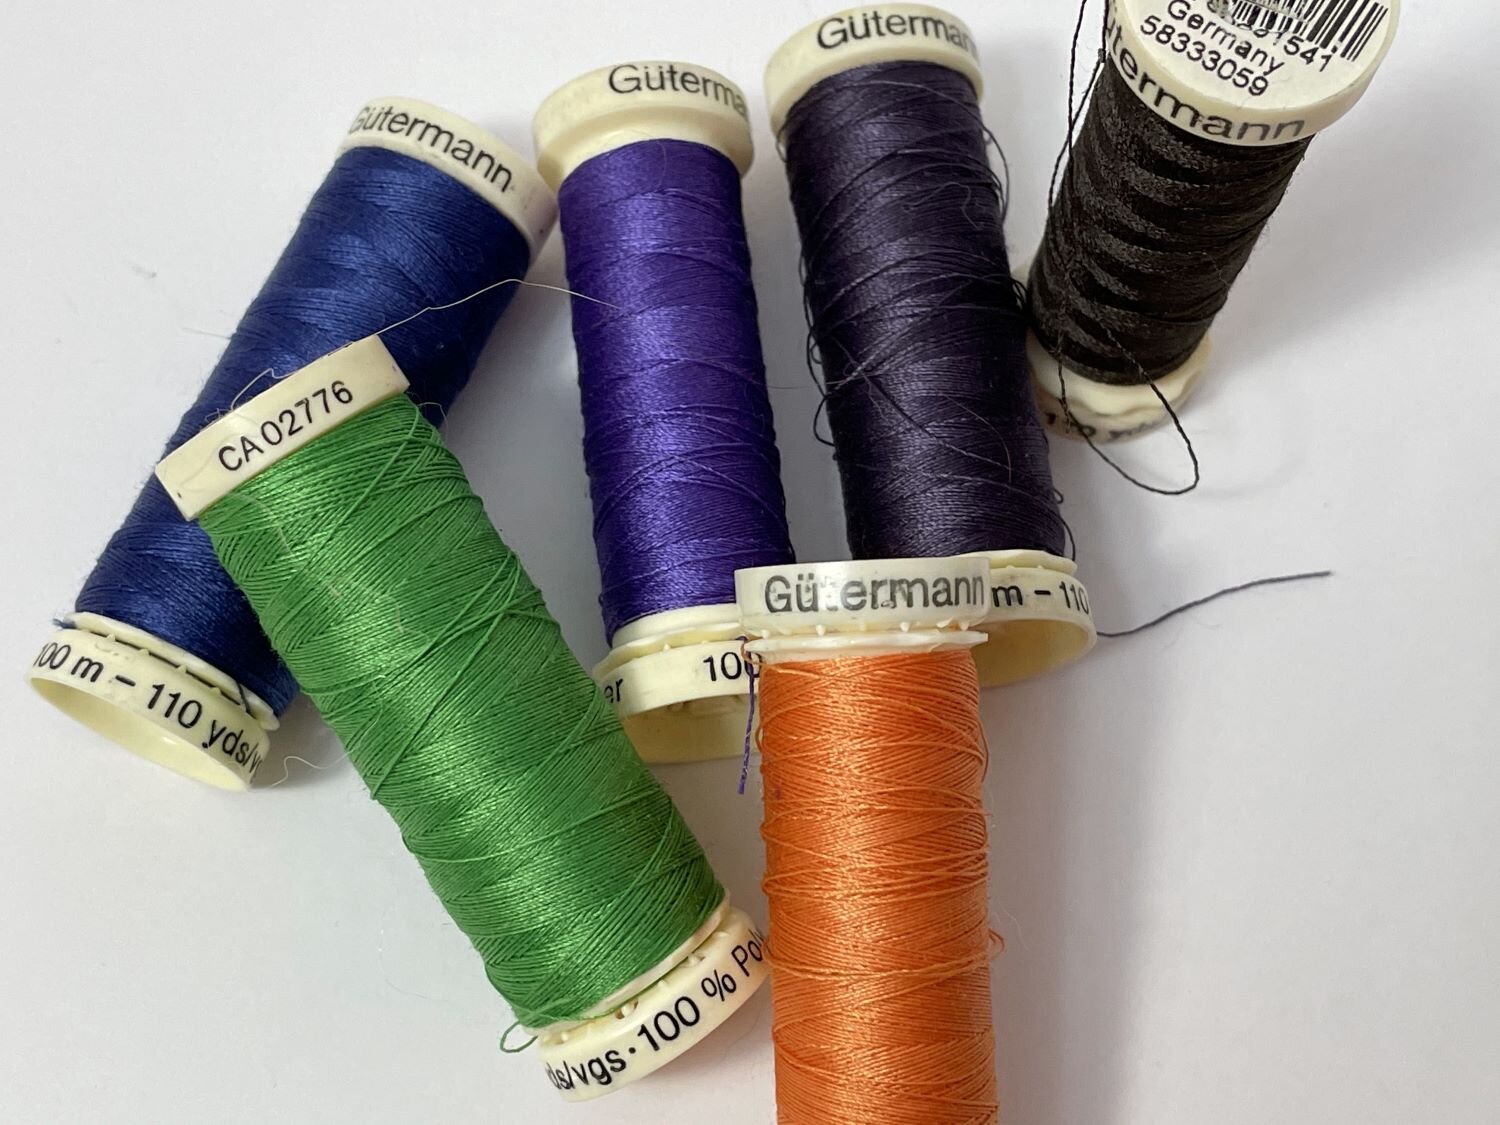 Sewing Thread - 25 types (& How to select the best one) - SewGuide